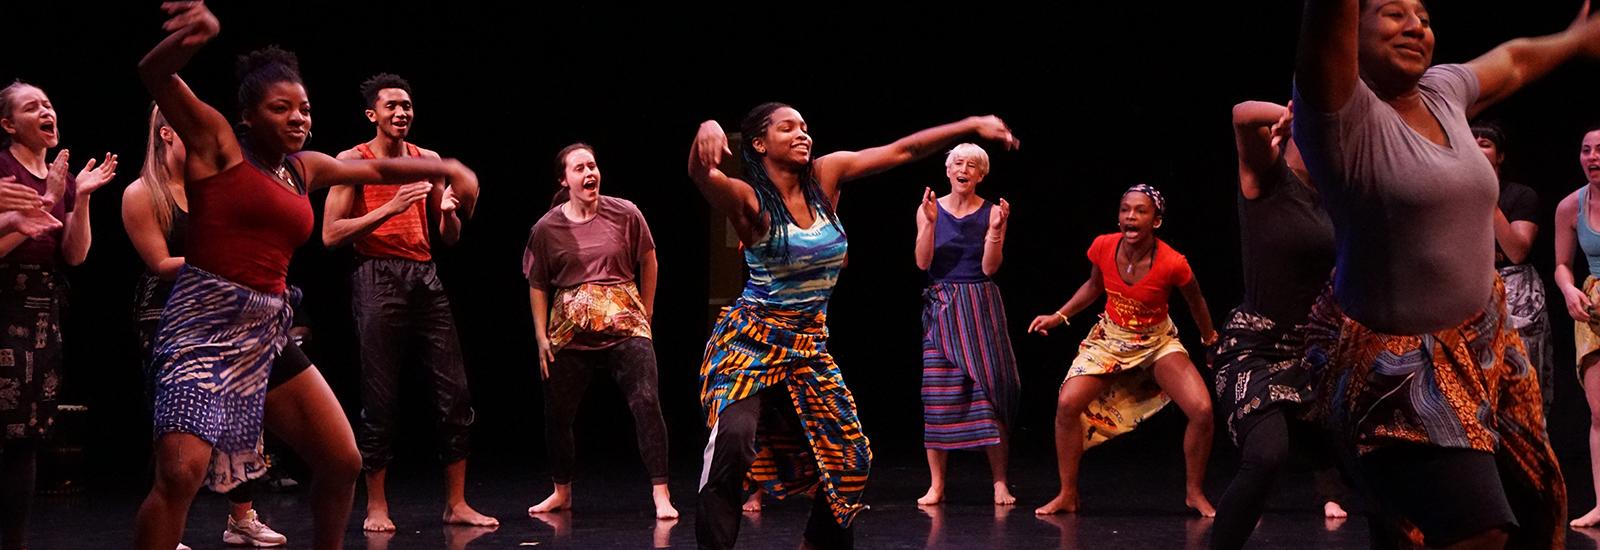 Dancers performing African Diasporic dance on a stage